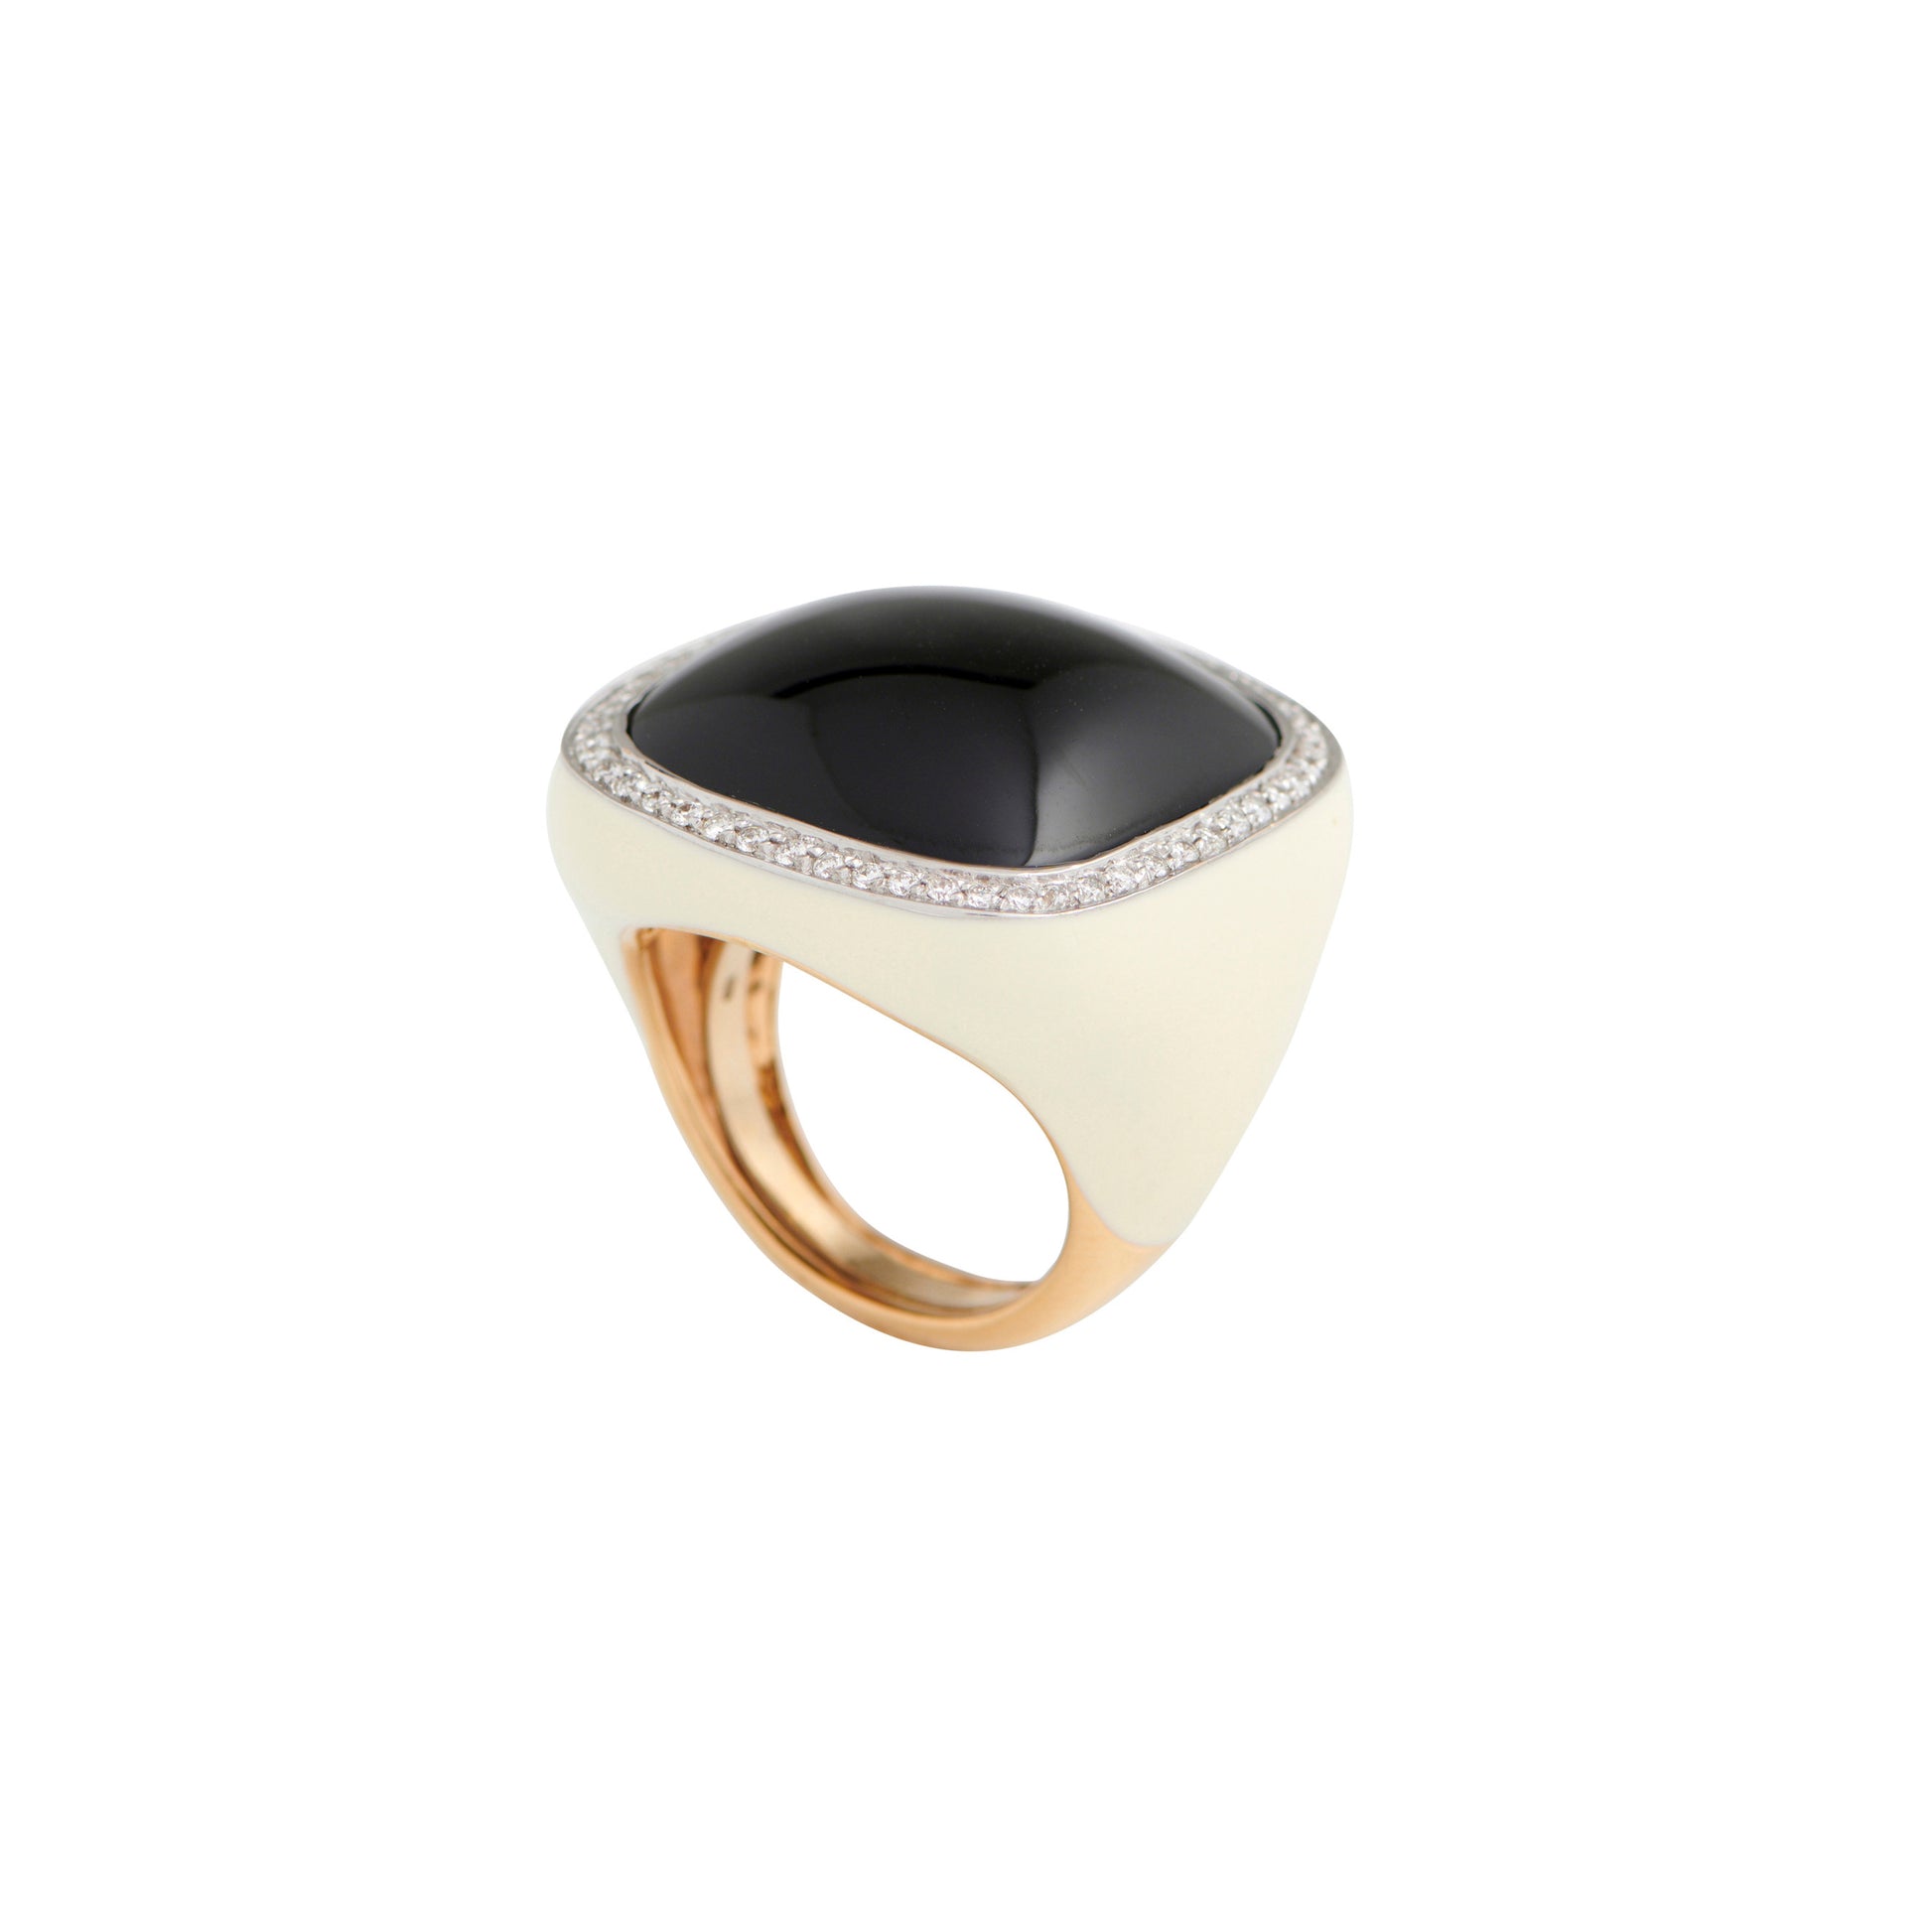 Post-1980s 18KT Yellow Gold Onyx, Diamond & Lacquer Ring profile